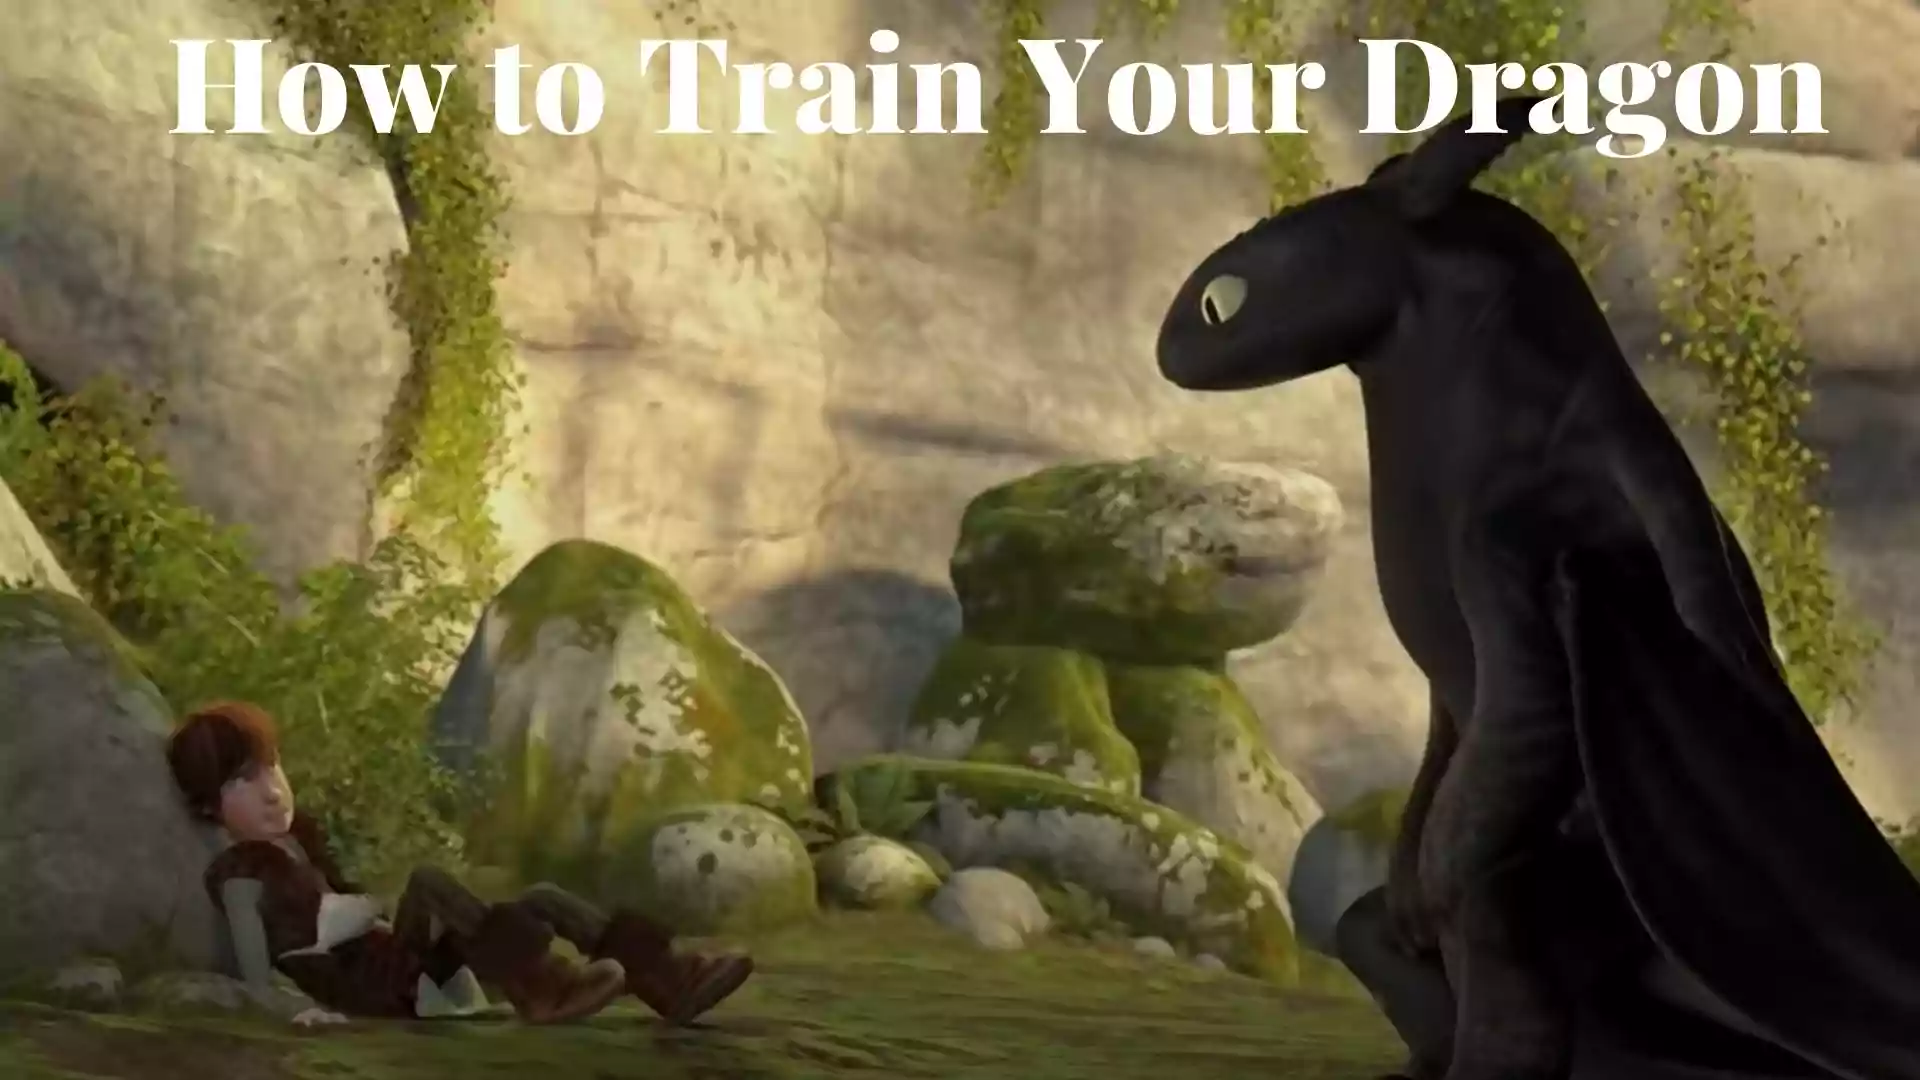 How to Train Your Dragon Wallpaper and Image